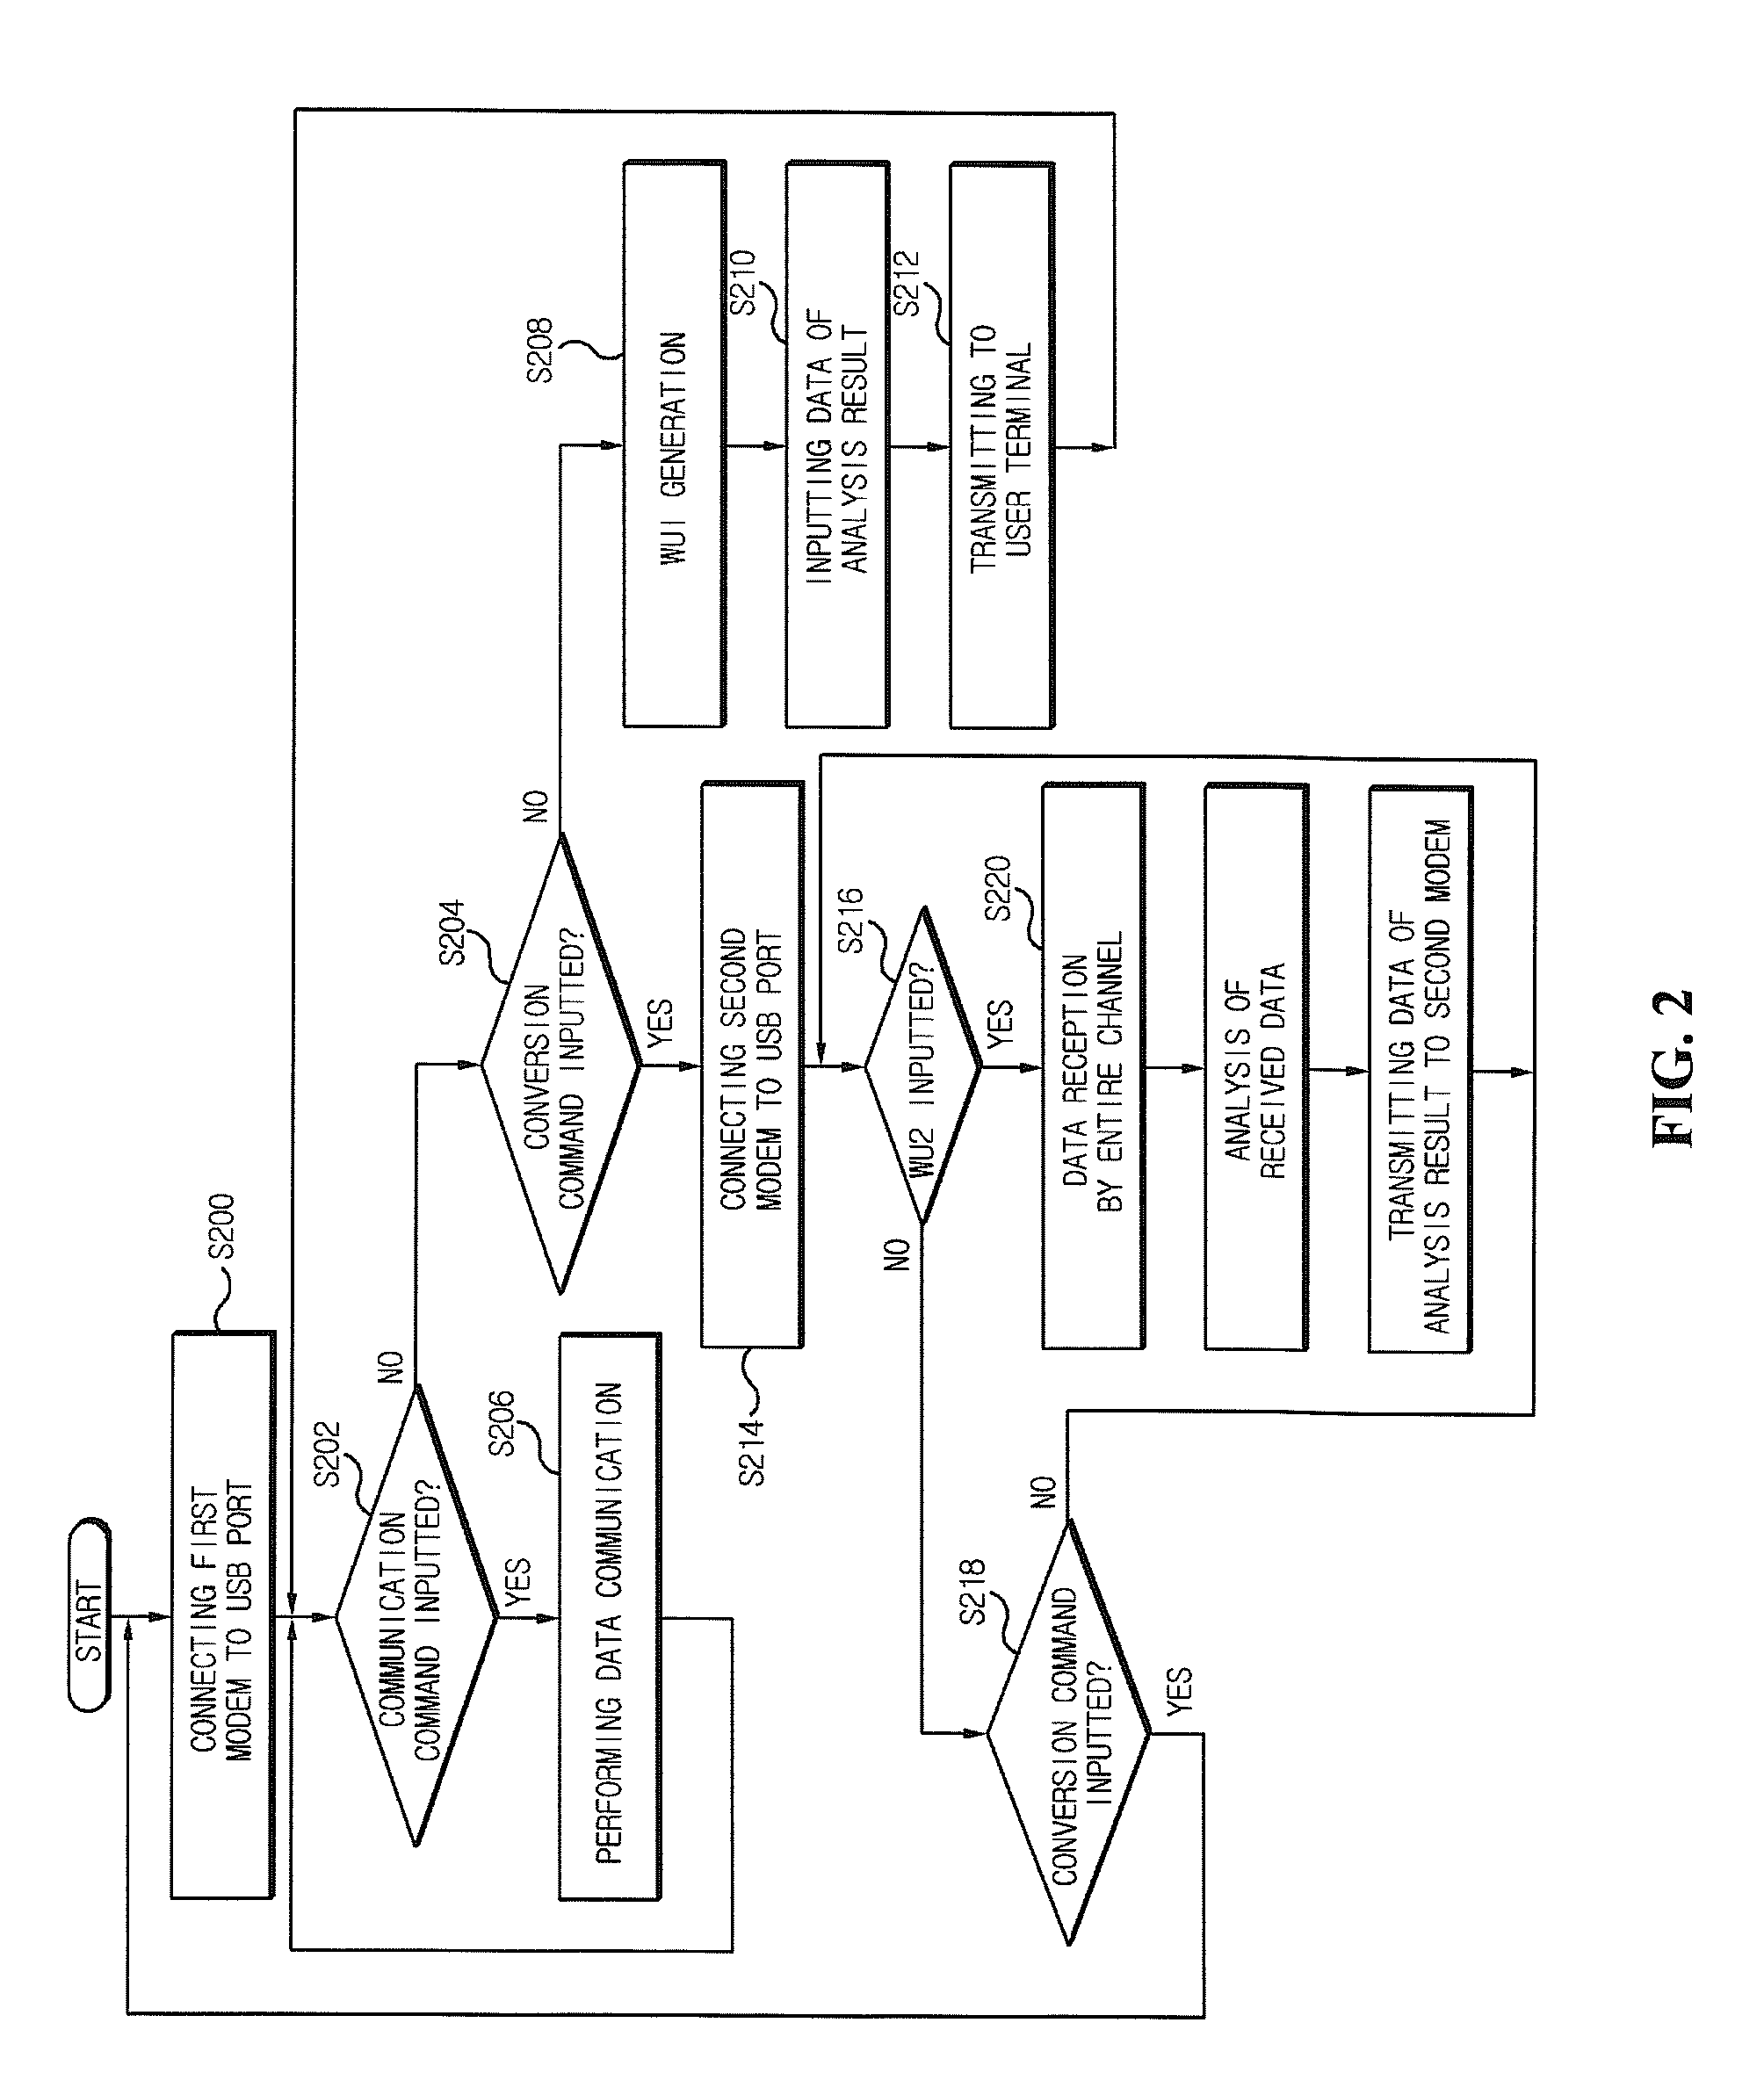 Apparatus and method for controlling dual band dual modem